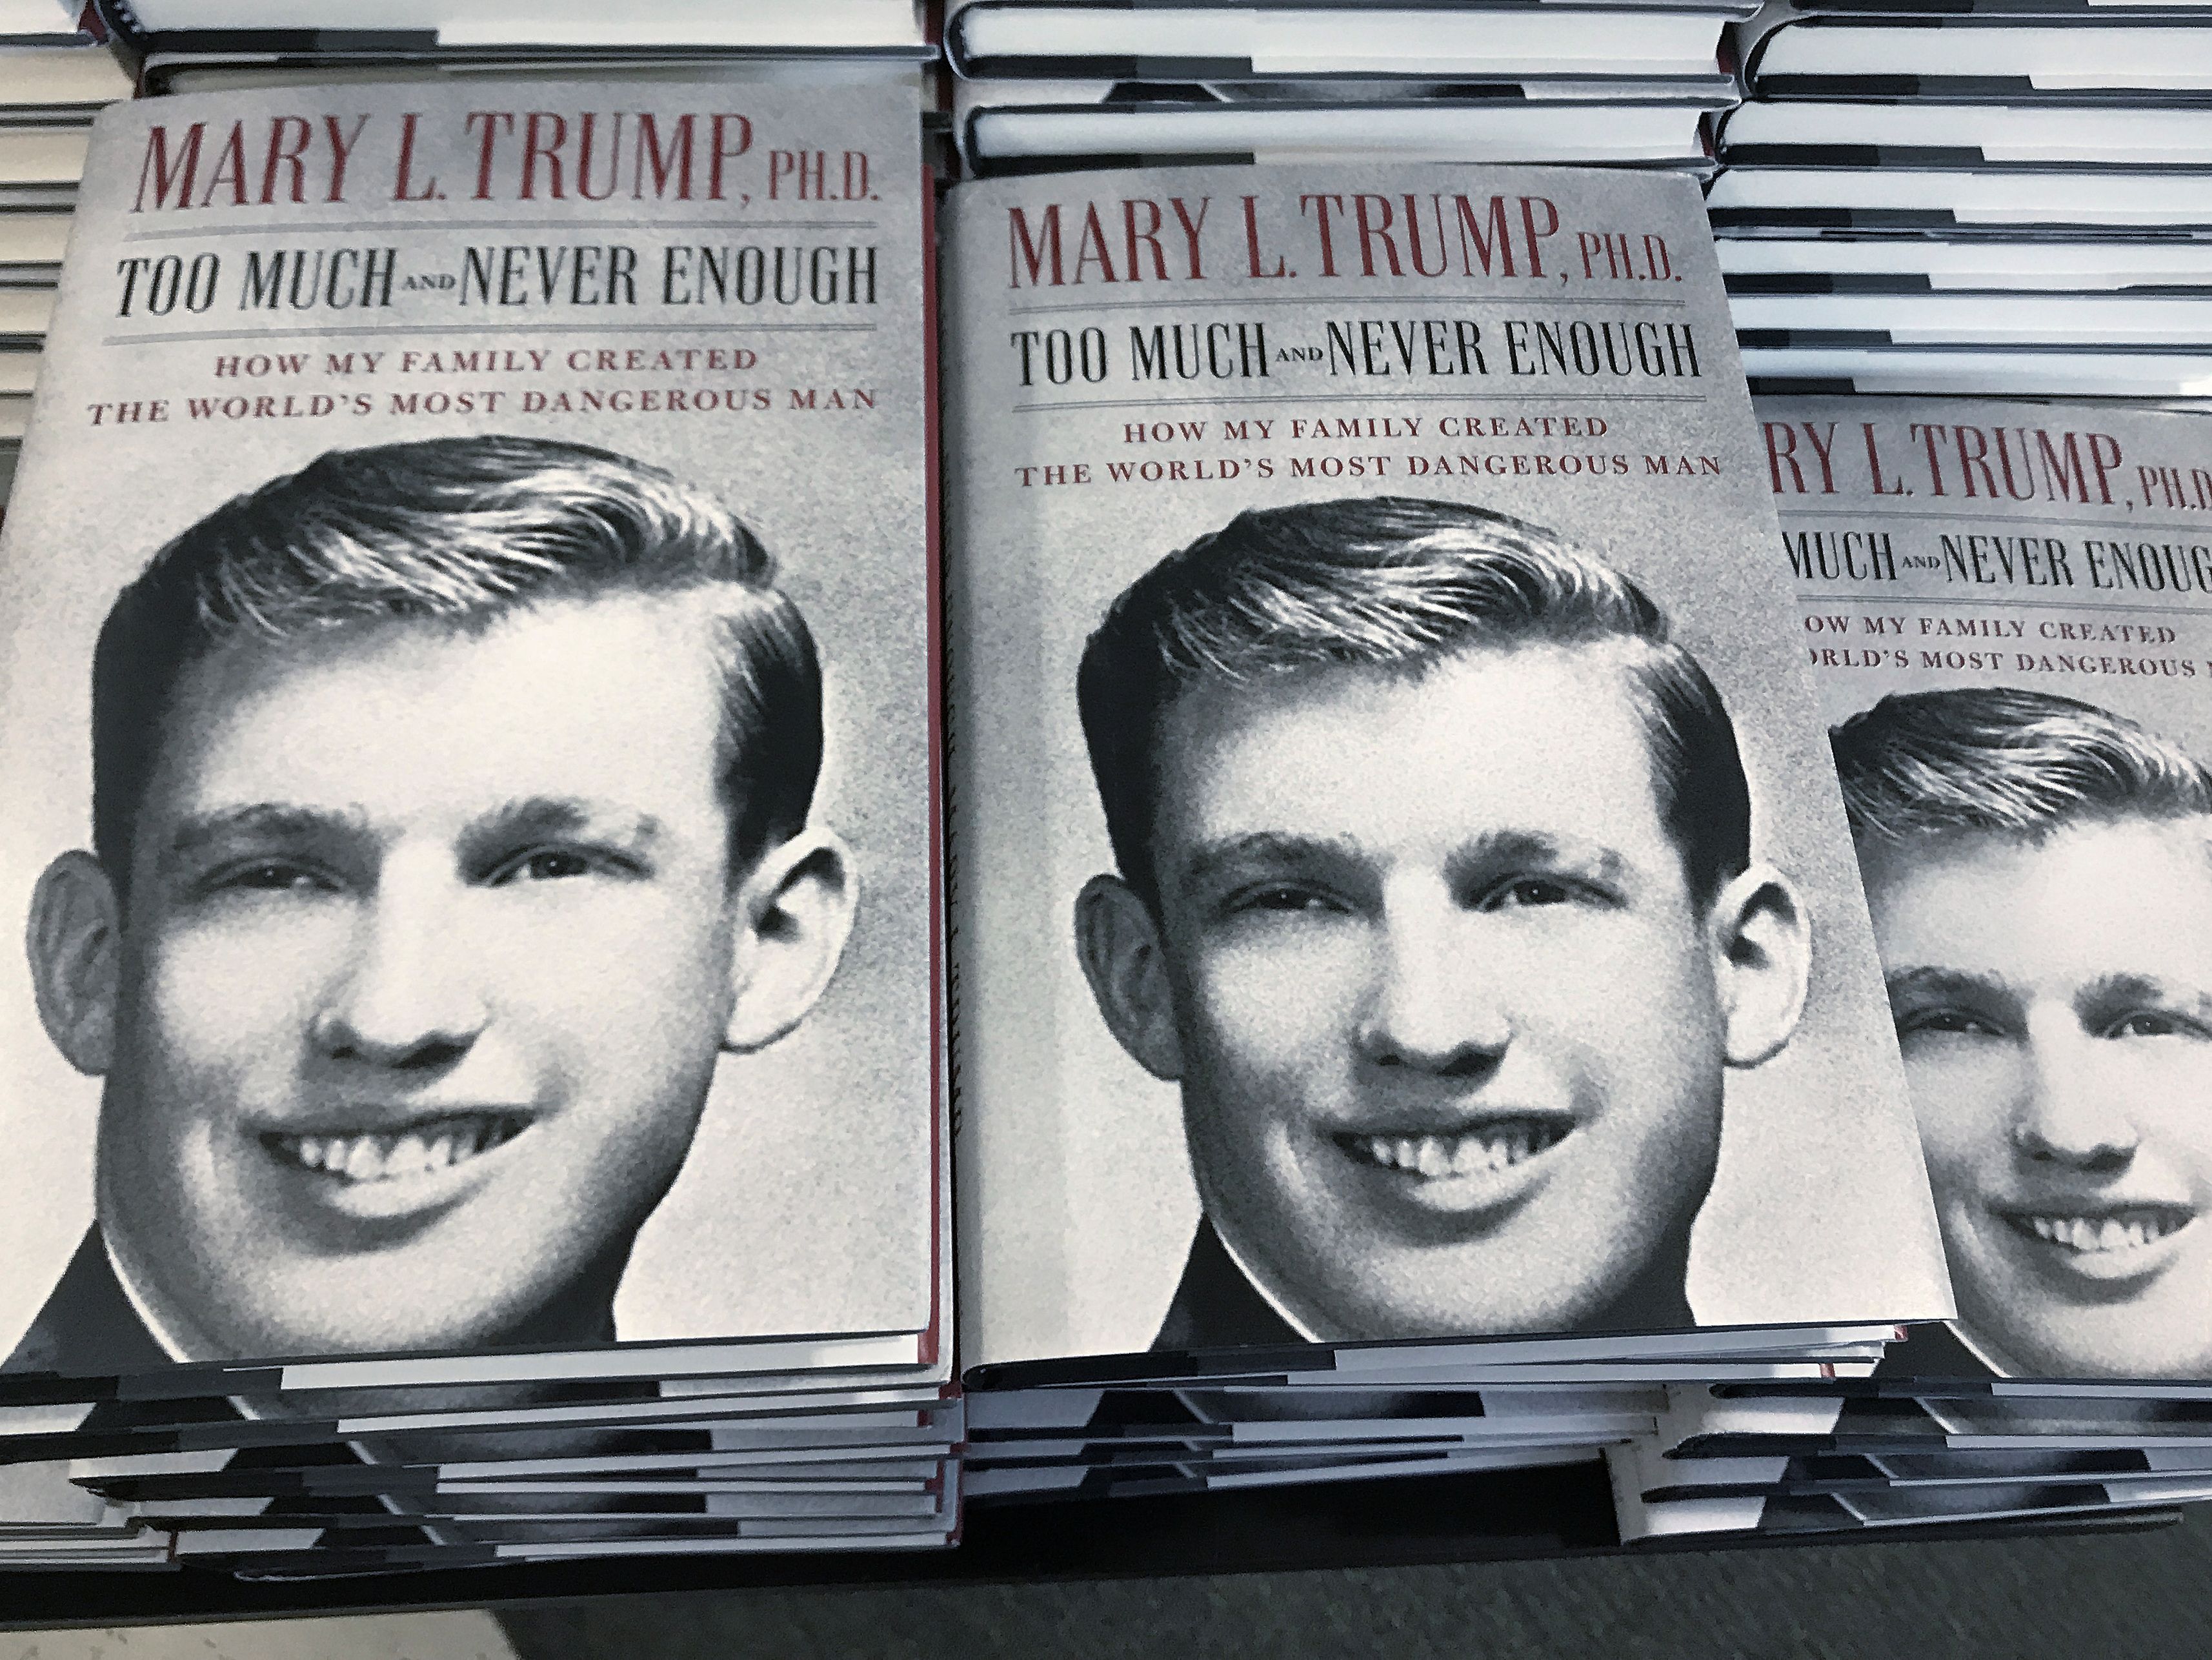 The book "Too Much and Never Enough" by Mary Trump is pictured in a bookstore in New York City. (Photo: Carlo Allegri/Reuters)